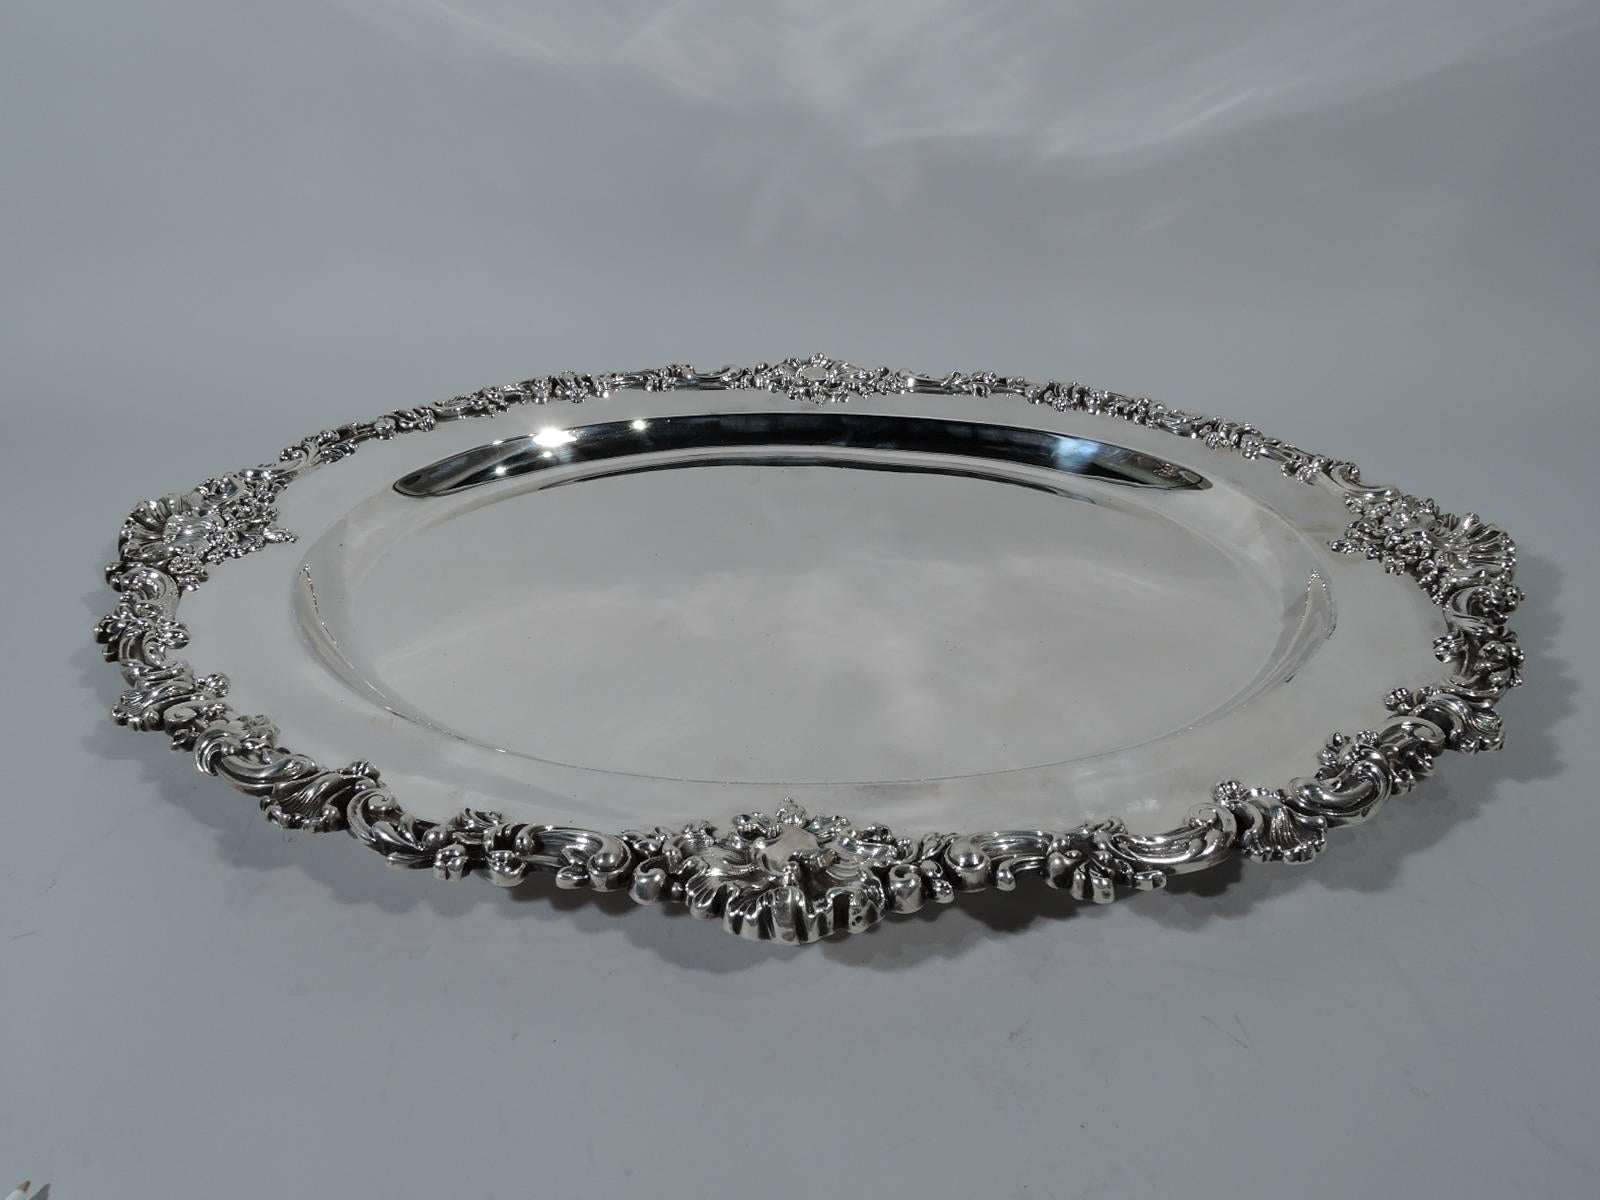 Large American sterling silver serving tray, circa 1890. Oval well and sumptuous and substantial rim with applied flowers, leaves, and shells. A piece of the fancy. Hallmarked Theodore B. Starr, a turn-of-the-century New York maker and retailer.